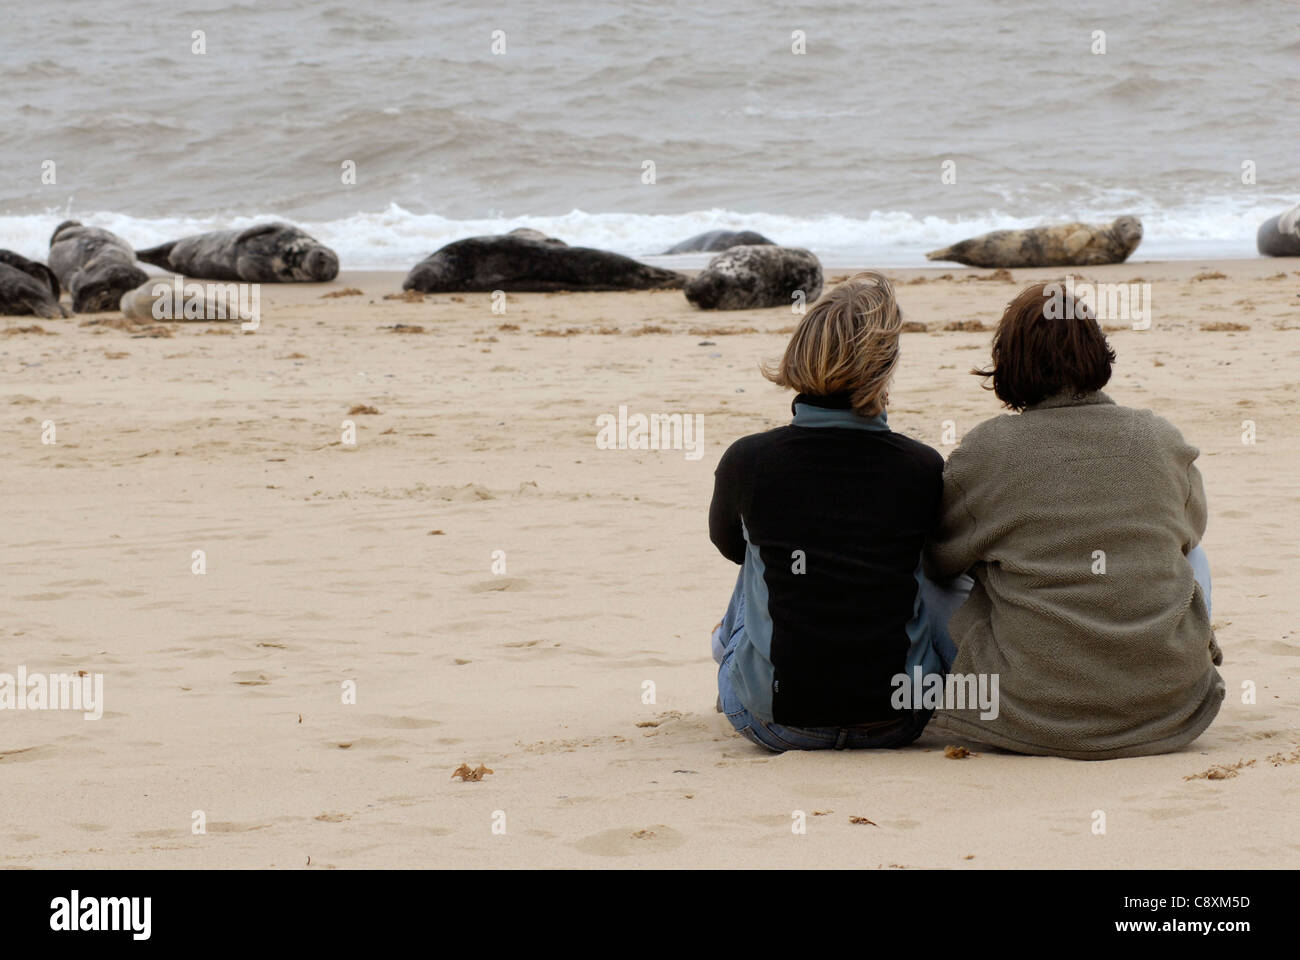 Two women sitting on the beach looking out to sea and watching the seals Stock Photo